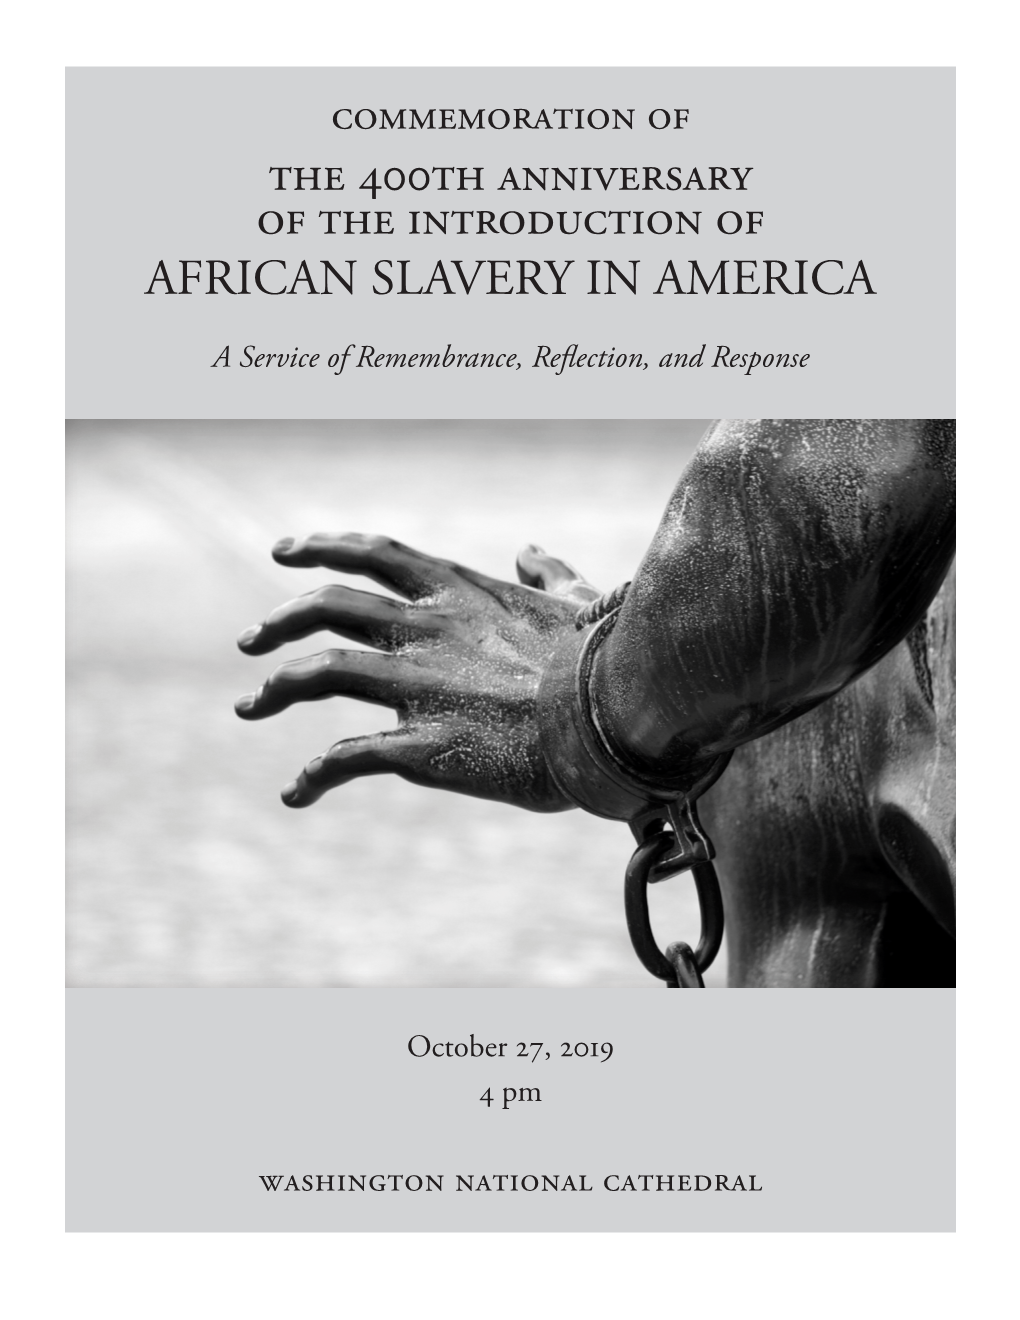 THE 400Th ANNIVERSARY of the Introduction of AFRICAN SLAVERY in AMERICA